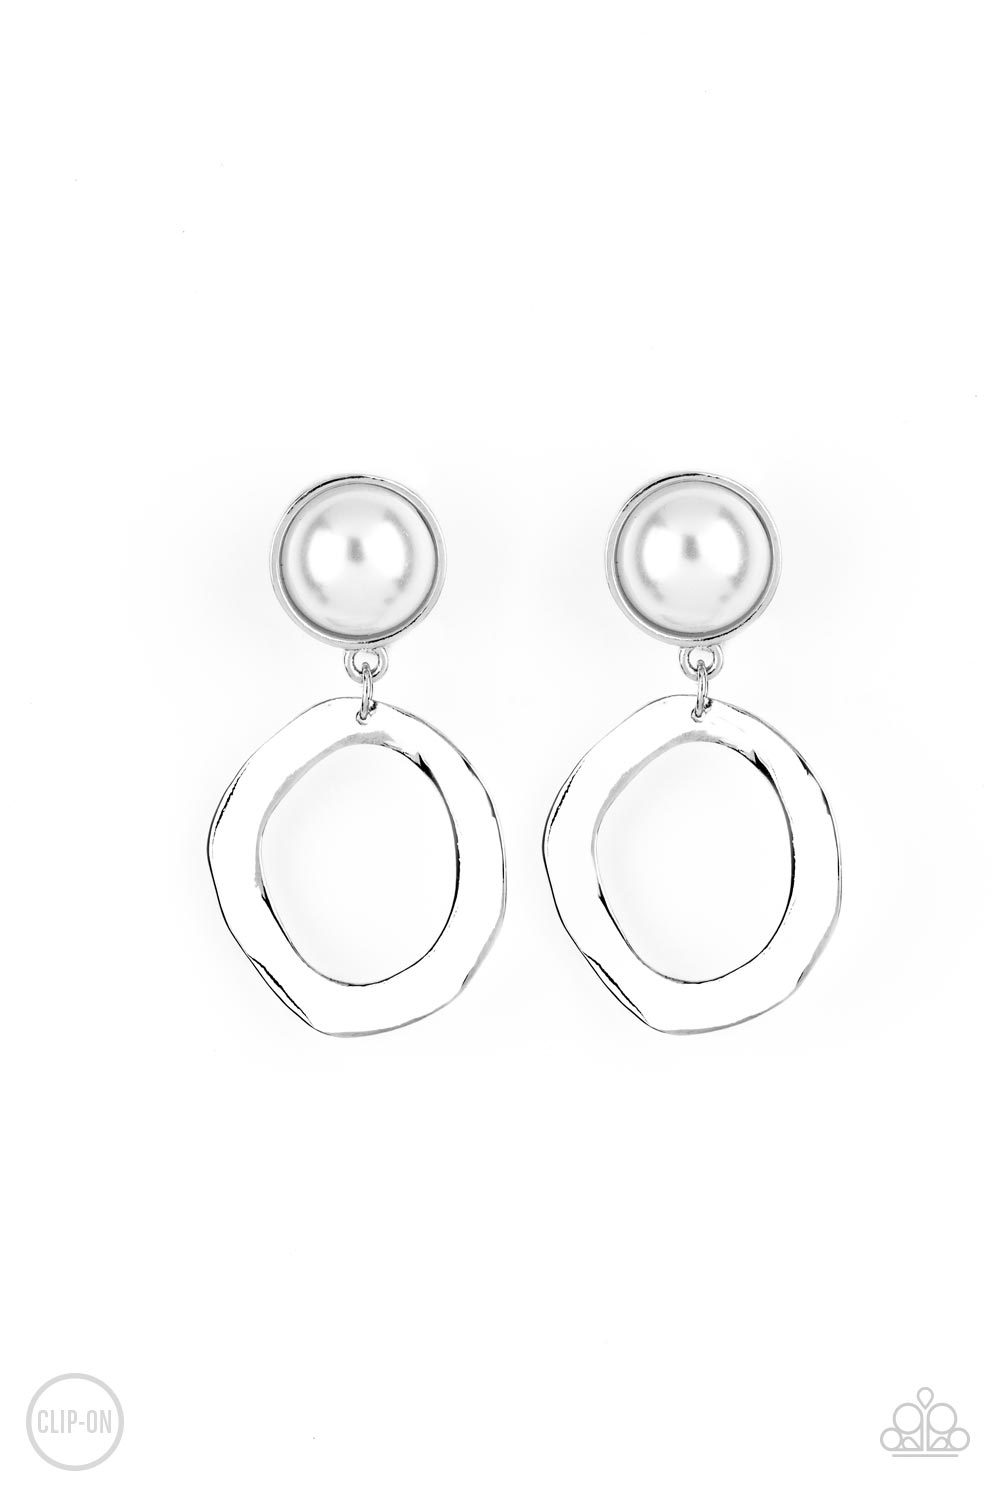 Delicately hammered in light-catching shimmer, an asymmetrical silver hoop swings from the bottom of an oversized pearl-drop fitting for a vintage flair. Earring attaches to a standard clip-on fitting.